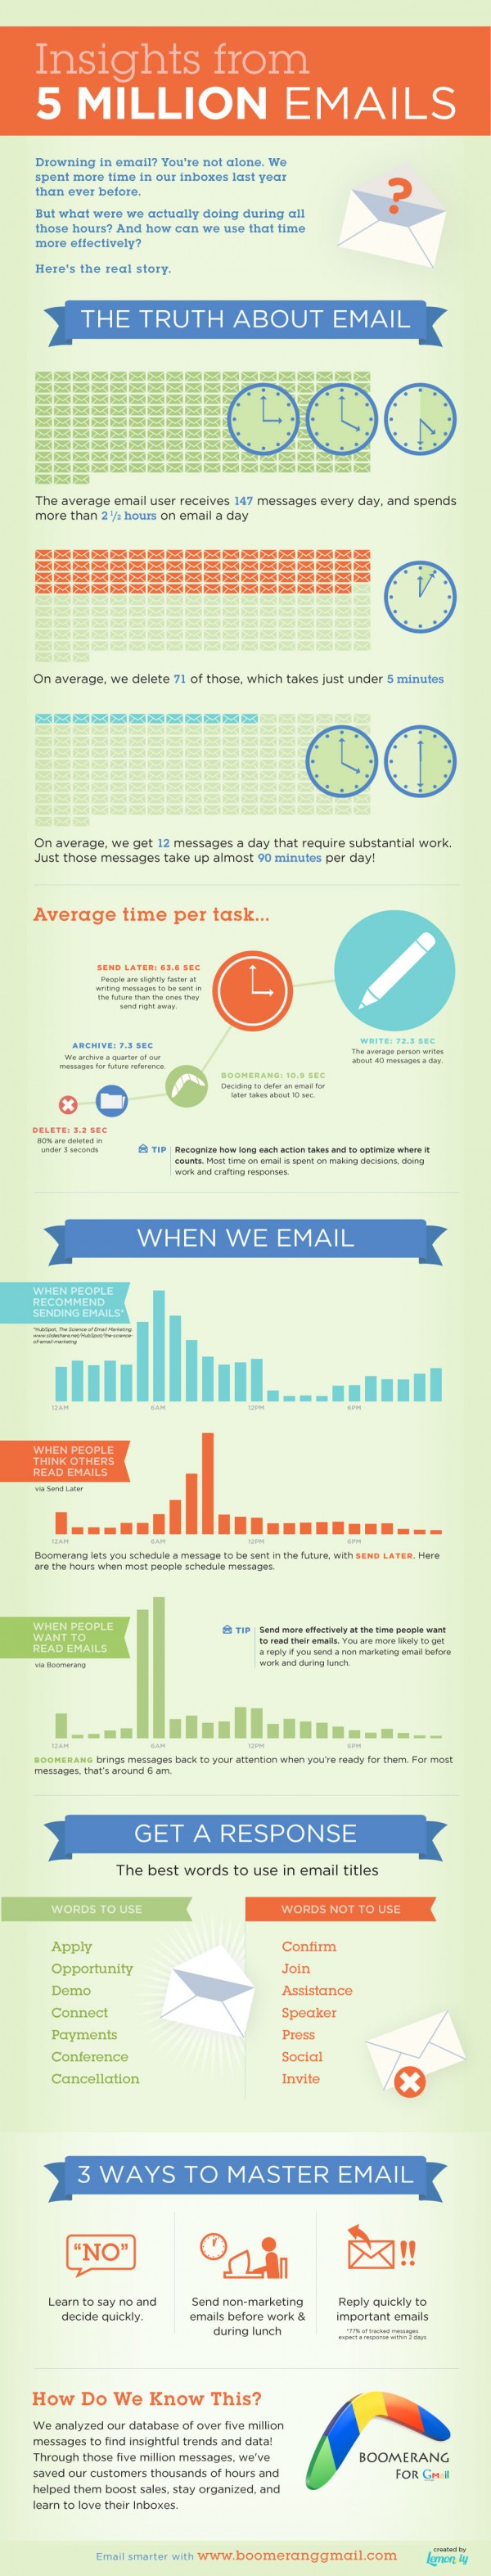 what do wholesalers do to send more effective emails